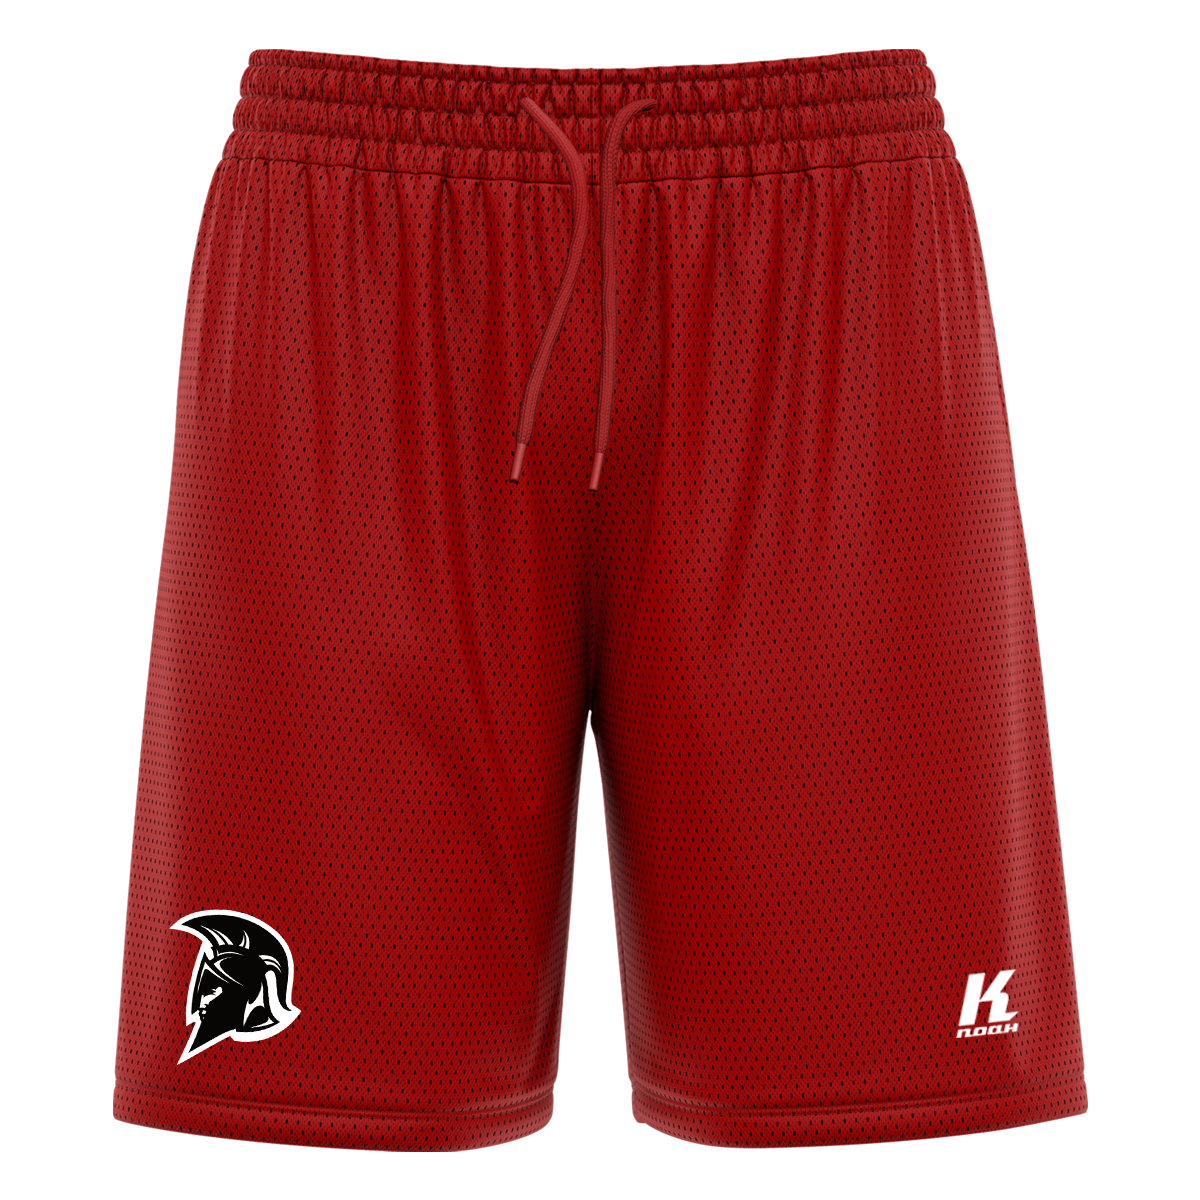 Short_red_front